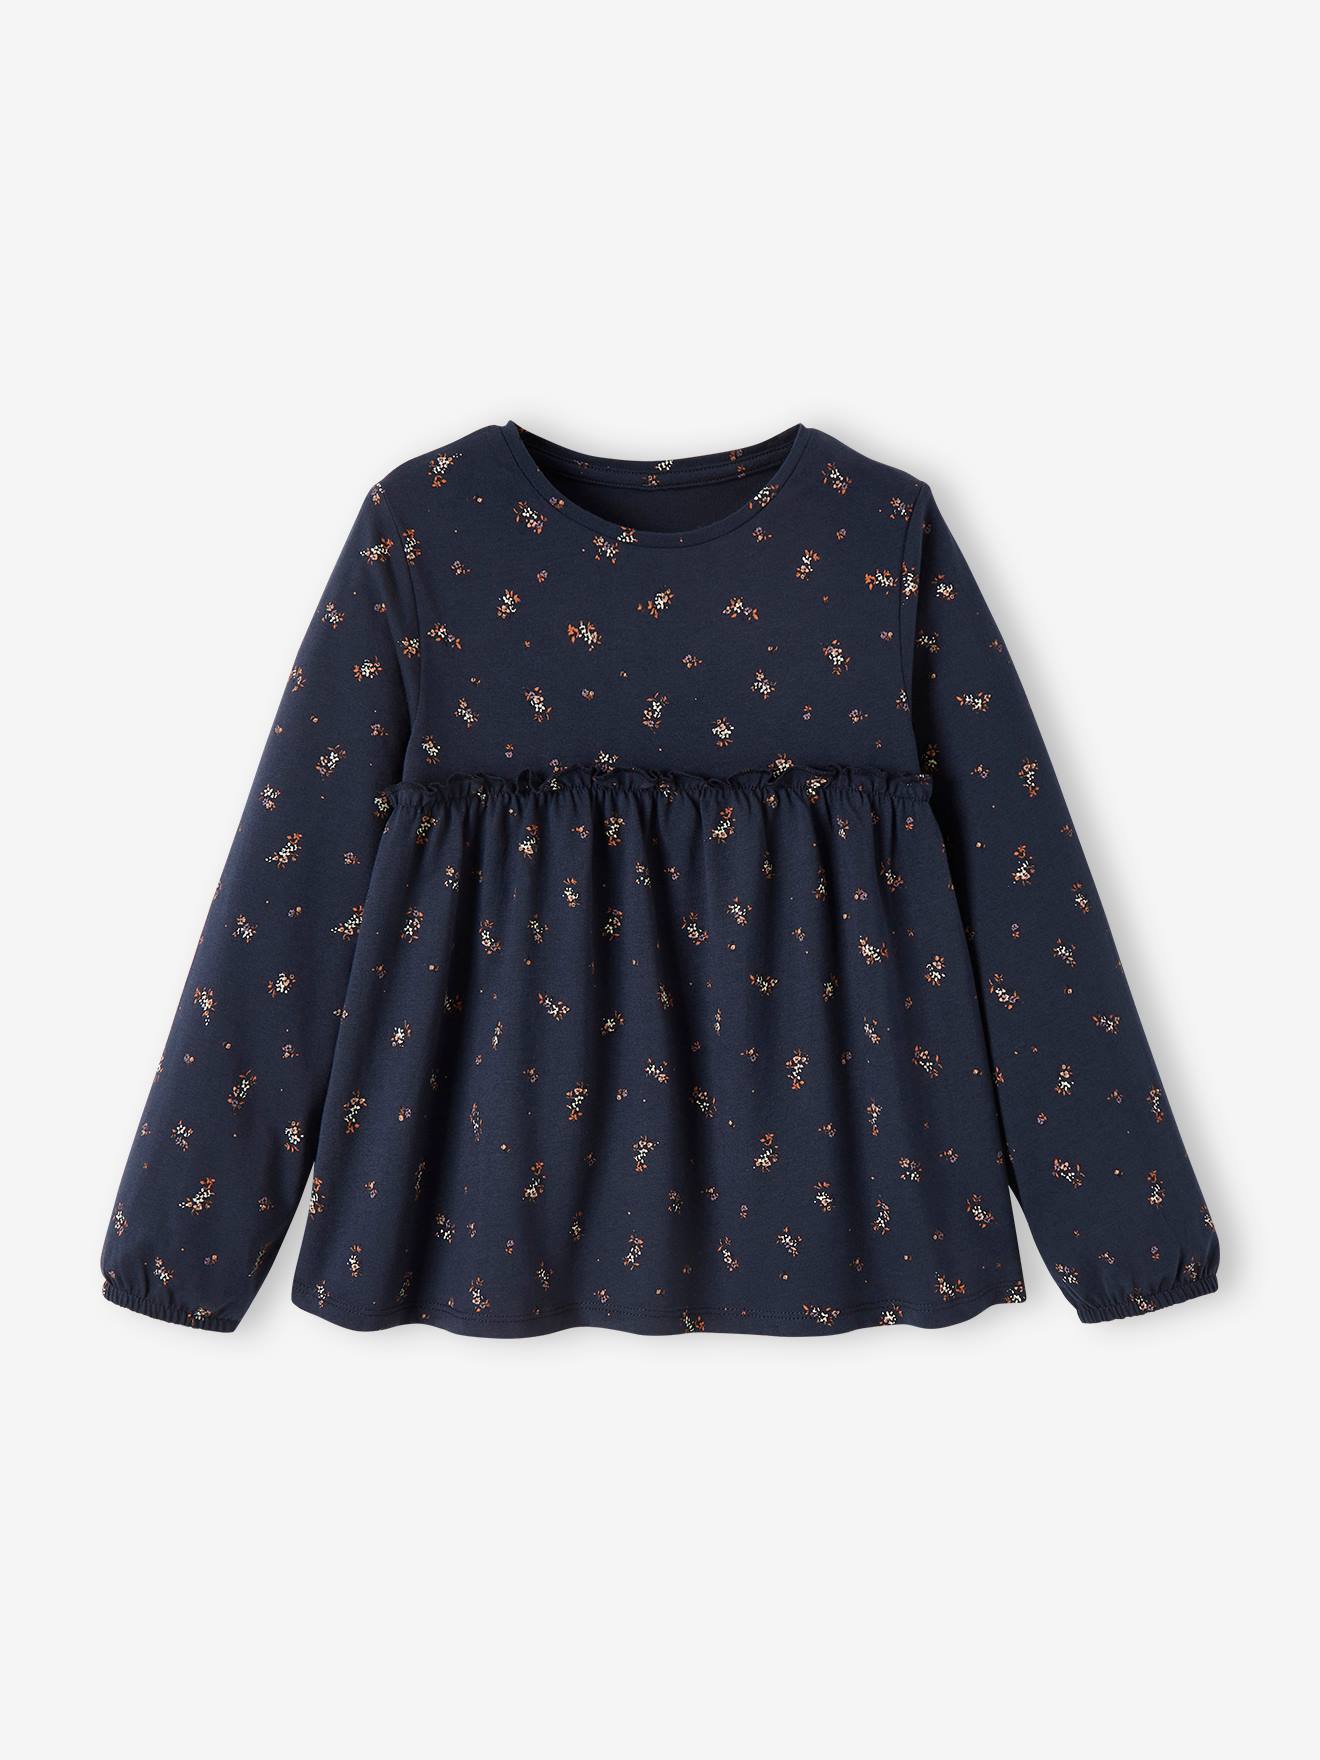 Printed Top for Girls blue dark all over printed